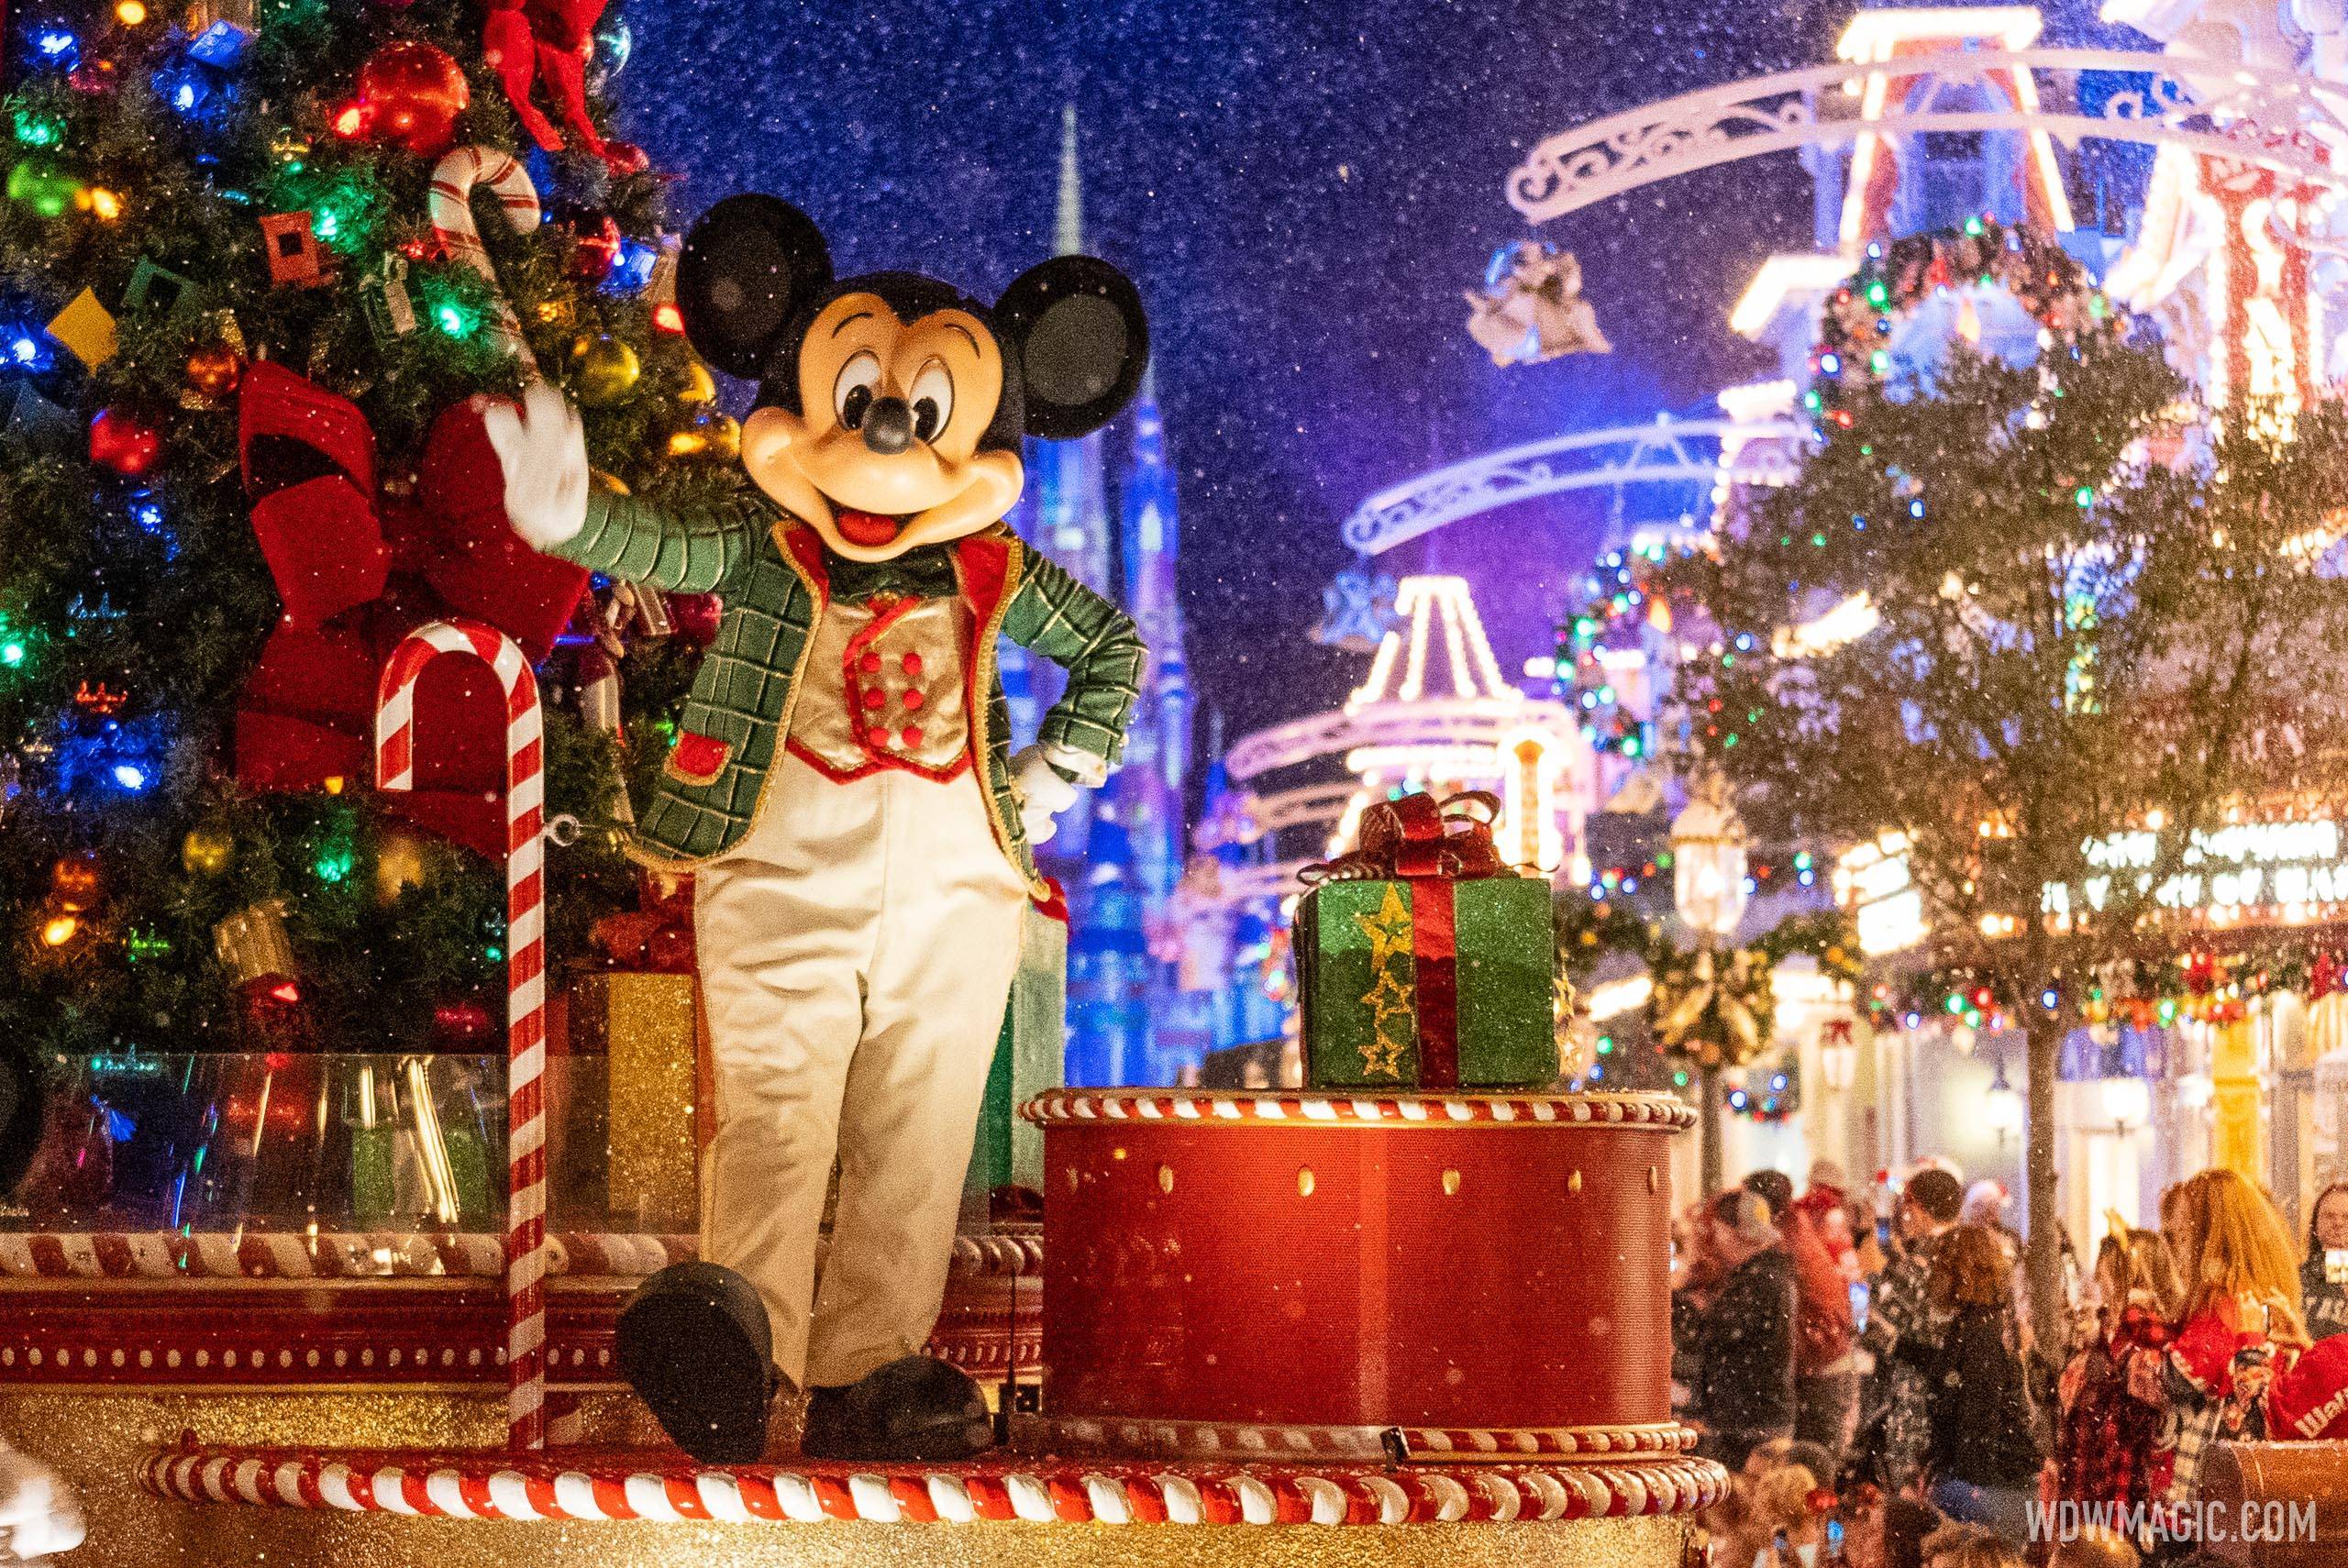 How to ring in the New Year at Walt Disney World 2022